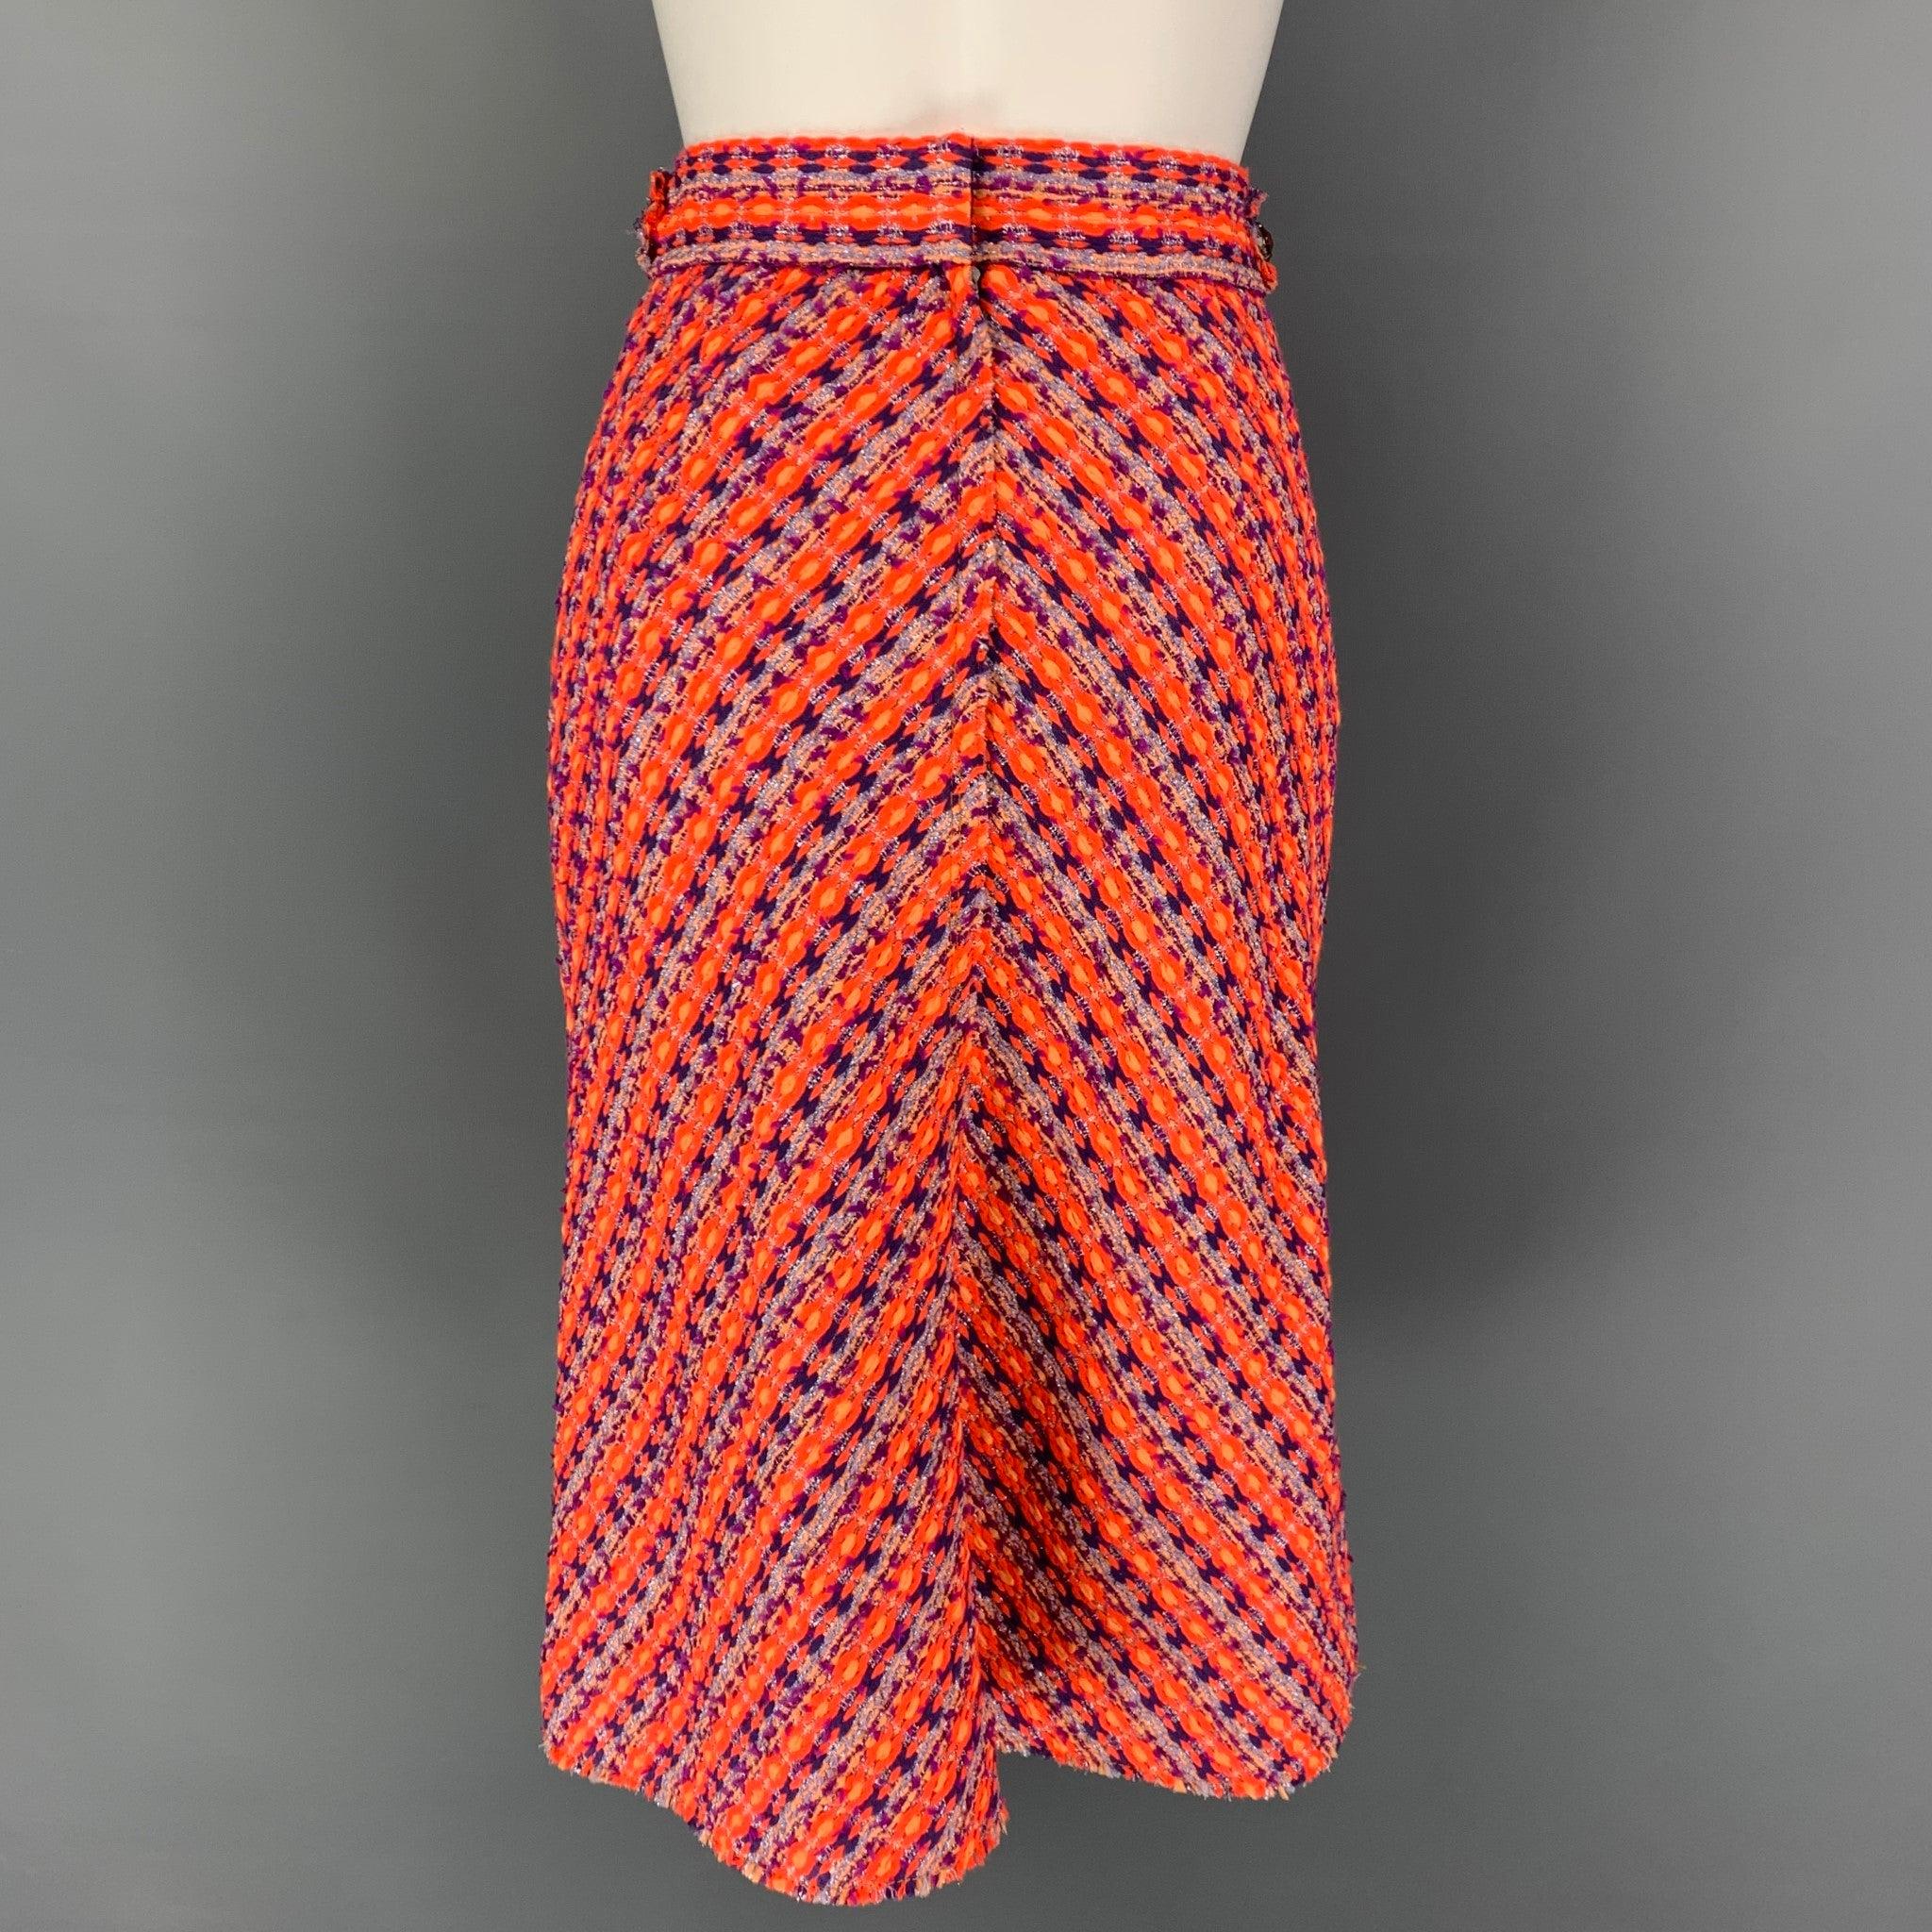 MARC JACOBS Size 0 Orange Multi-Color Modal Blend Tweed A-Line Skirt In Excellent Condition For Sale In San Francisco, CA